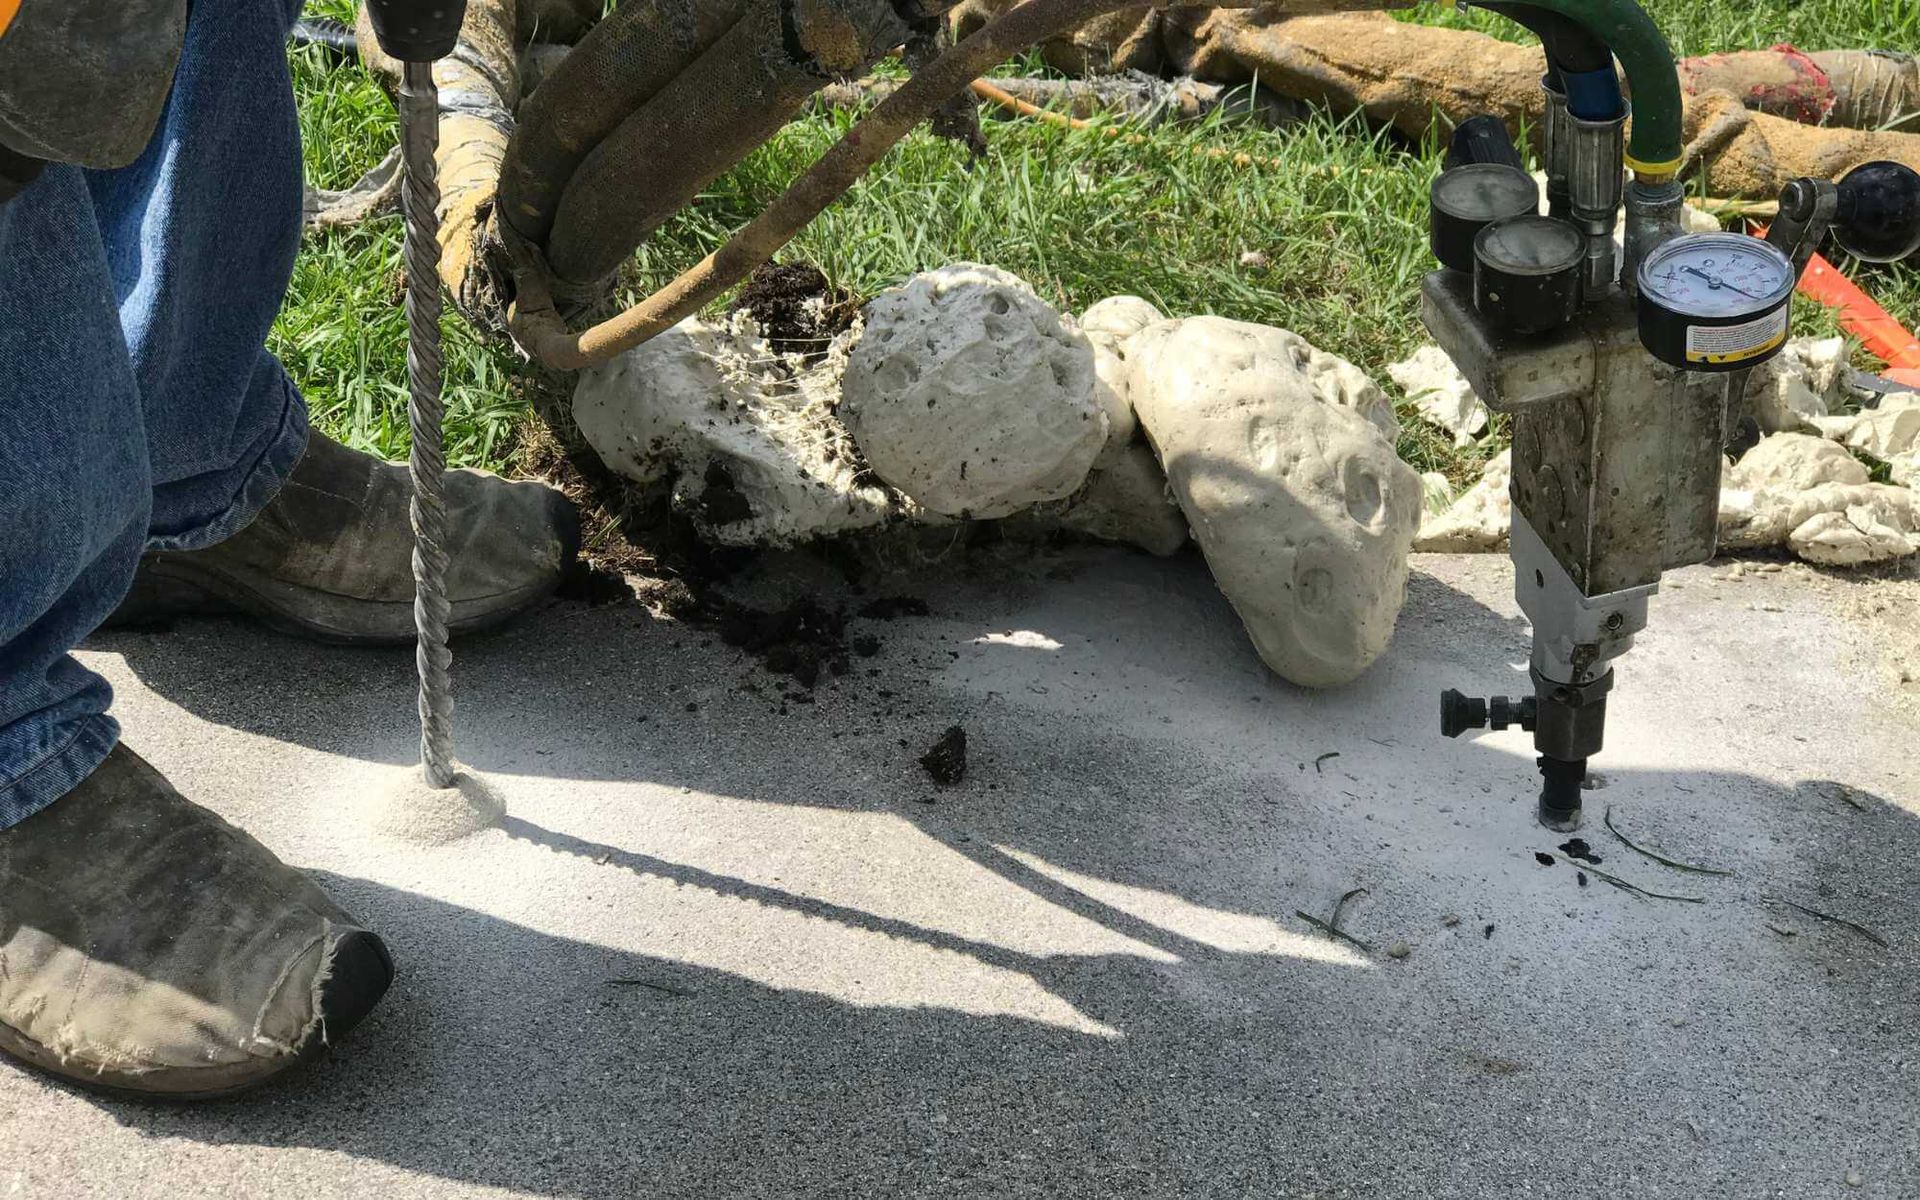 A person wearing jeans and work boots is using a drilling machine to inject materials into the concrete surface. The ground is partially covered with rocky residue and dirt. Green grass surrounds the work area, where various tools and equipment are scattered around—typical for a concrete repair project by a West Palm Beach FL restoration contractor.